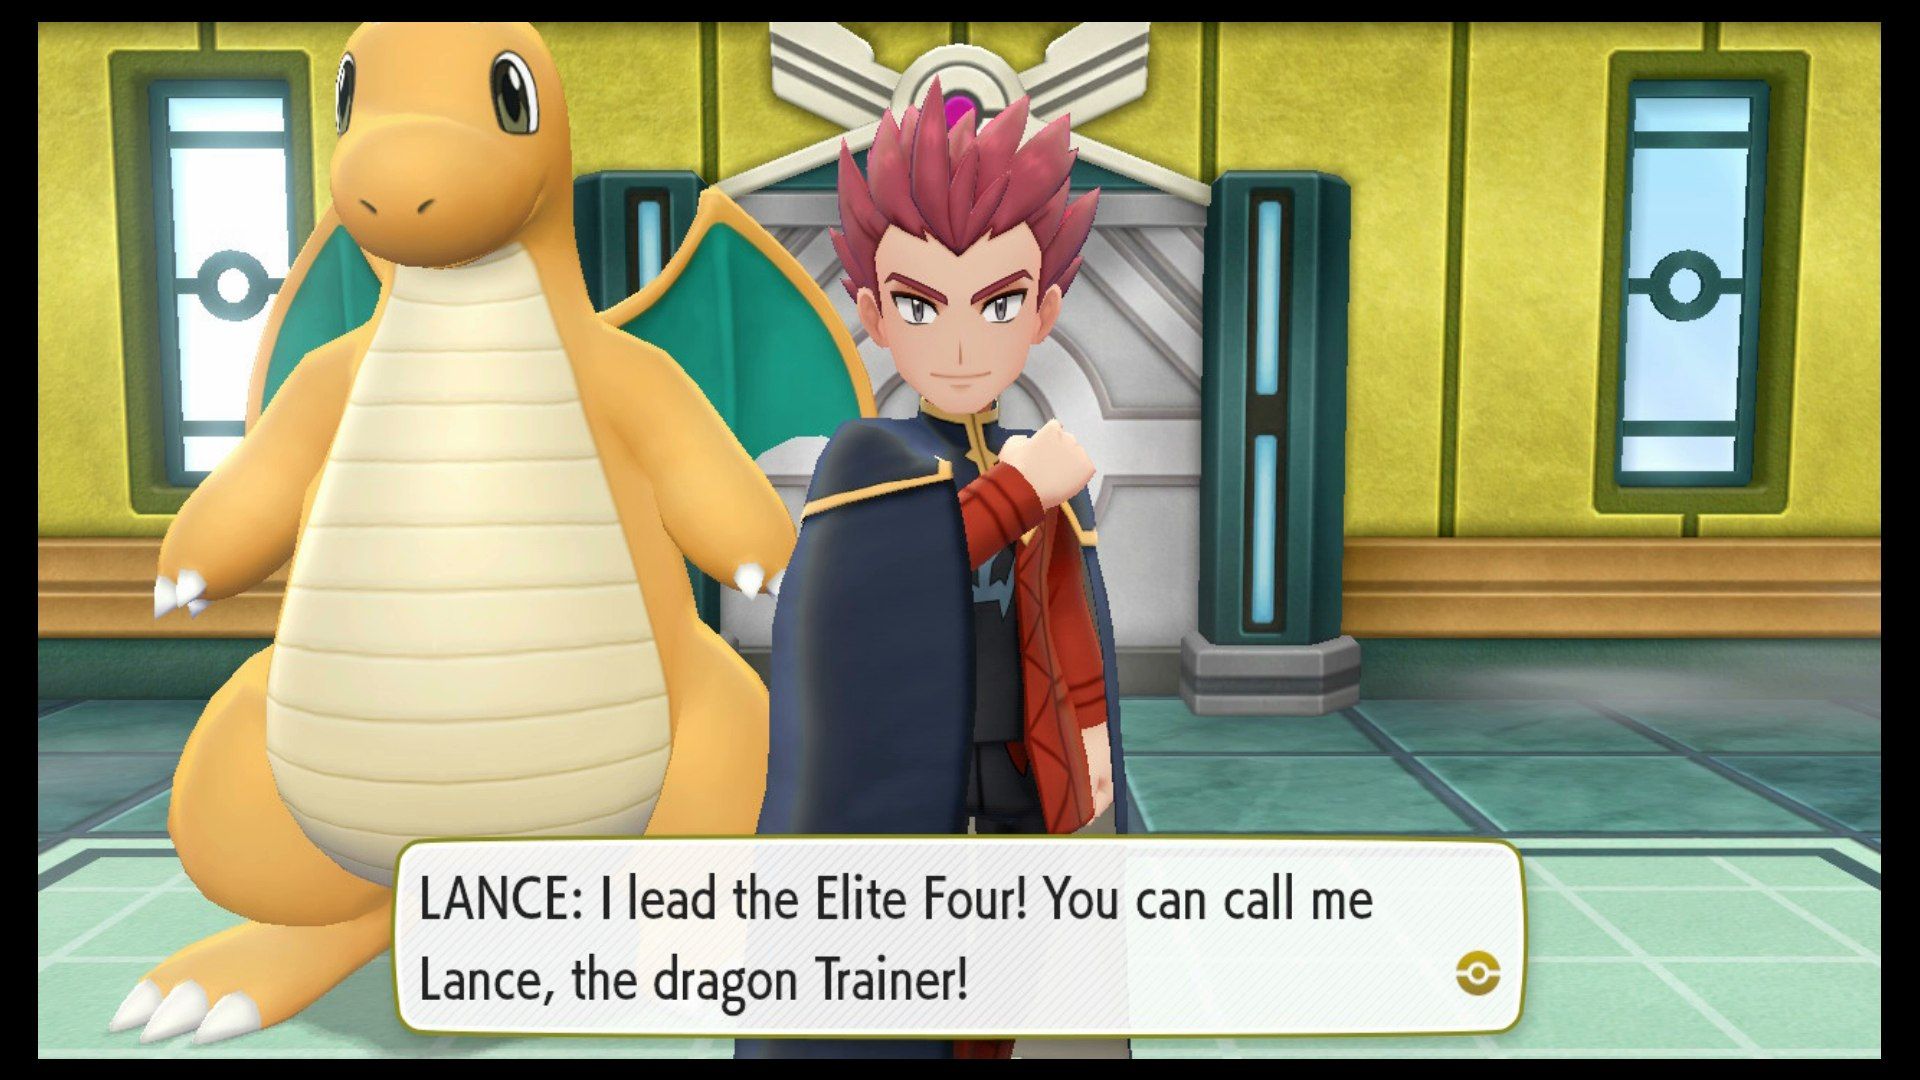 Pokémon 10 Facts About Lance From The Kanto Elite Four Fans Didn’t Know